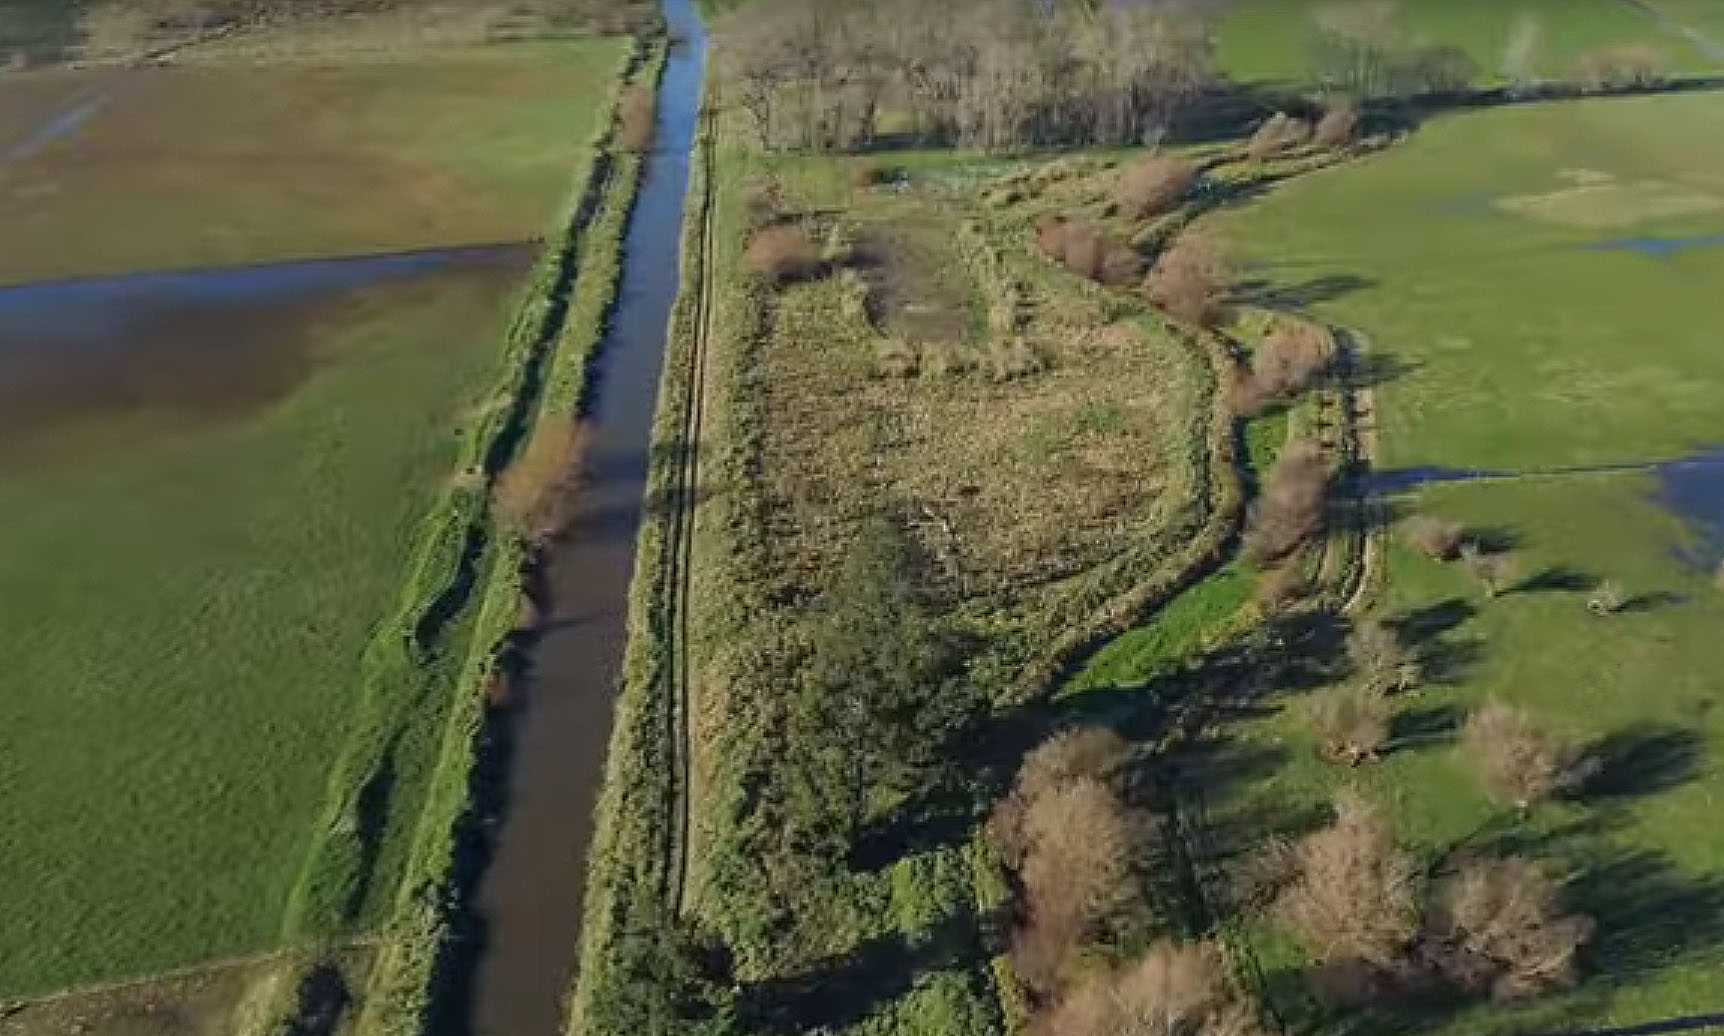 Fig. 1: The current man-made channel of the Hurutini /Haslwelll River (left) and the original natural channel (right). The water visible in the paddocks either side shows how readily this low-lying area is intrinsically wet and poor draining following heavy rains. (Image: ECan/Video 1)